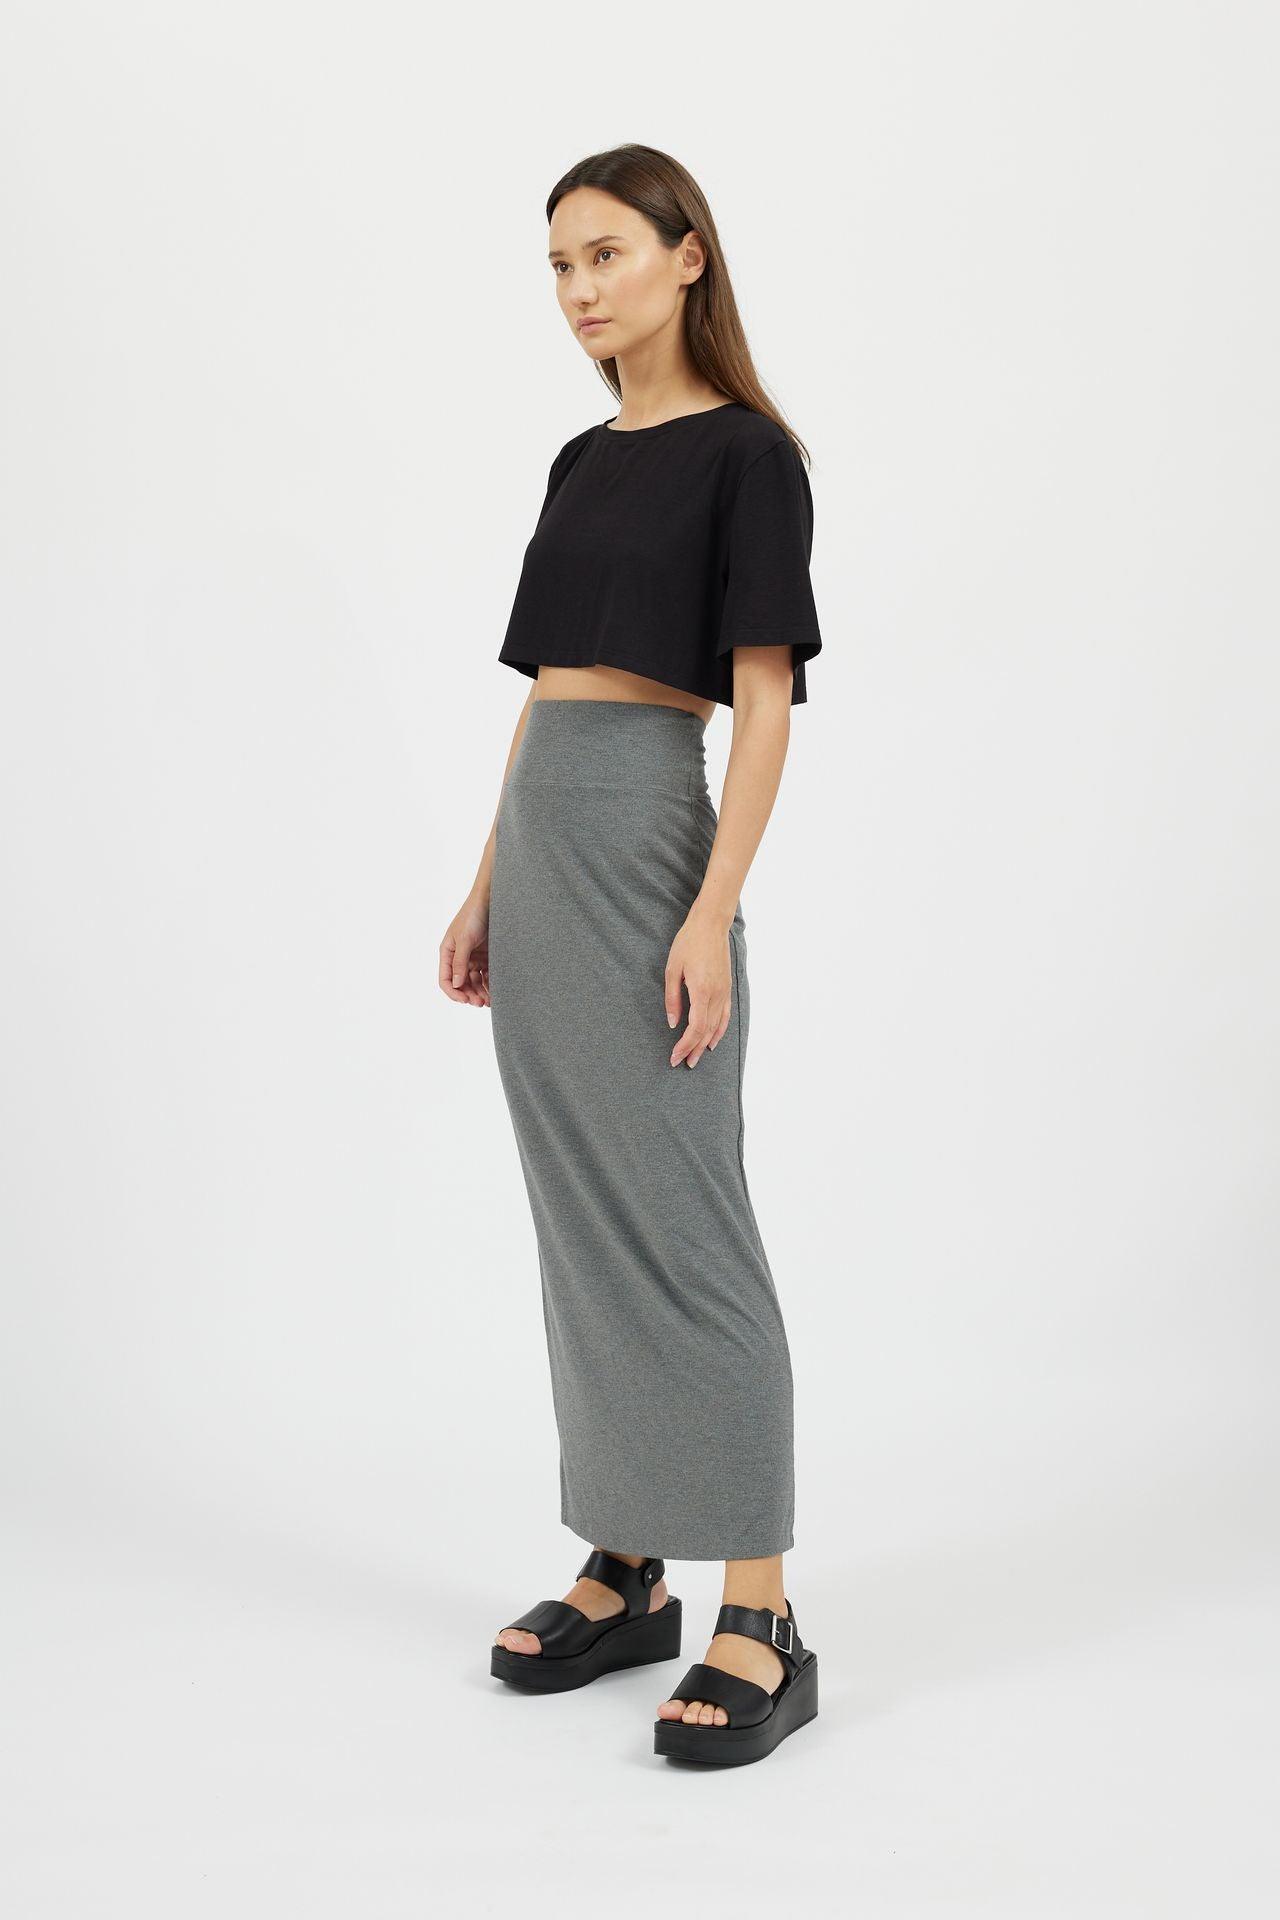 High Waisted Pencil Skirt | Skirts | Not Labeled